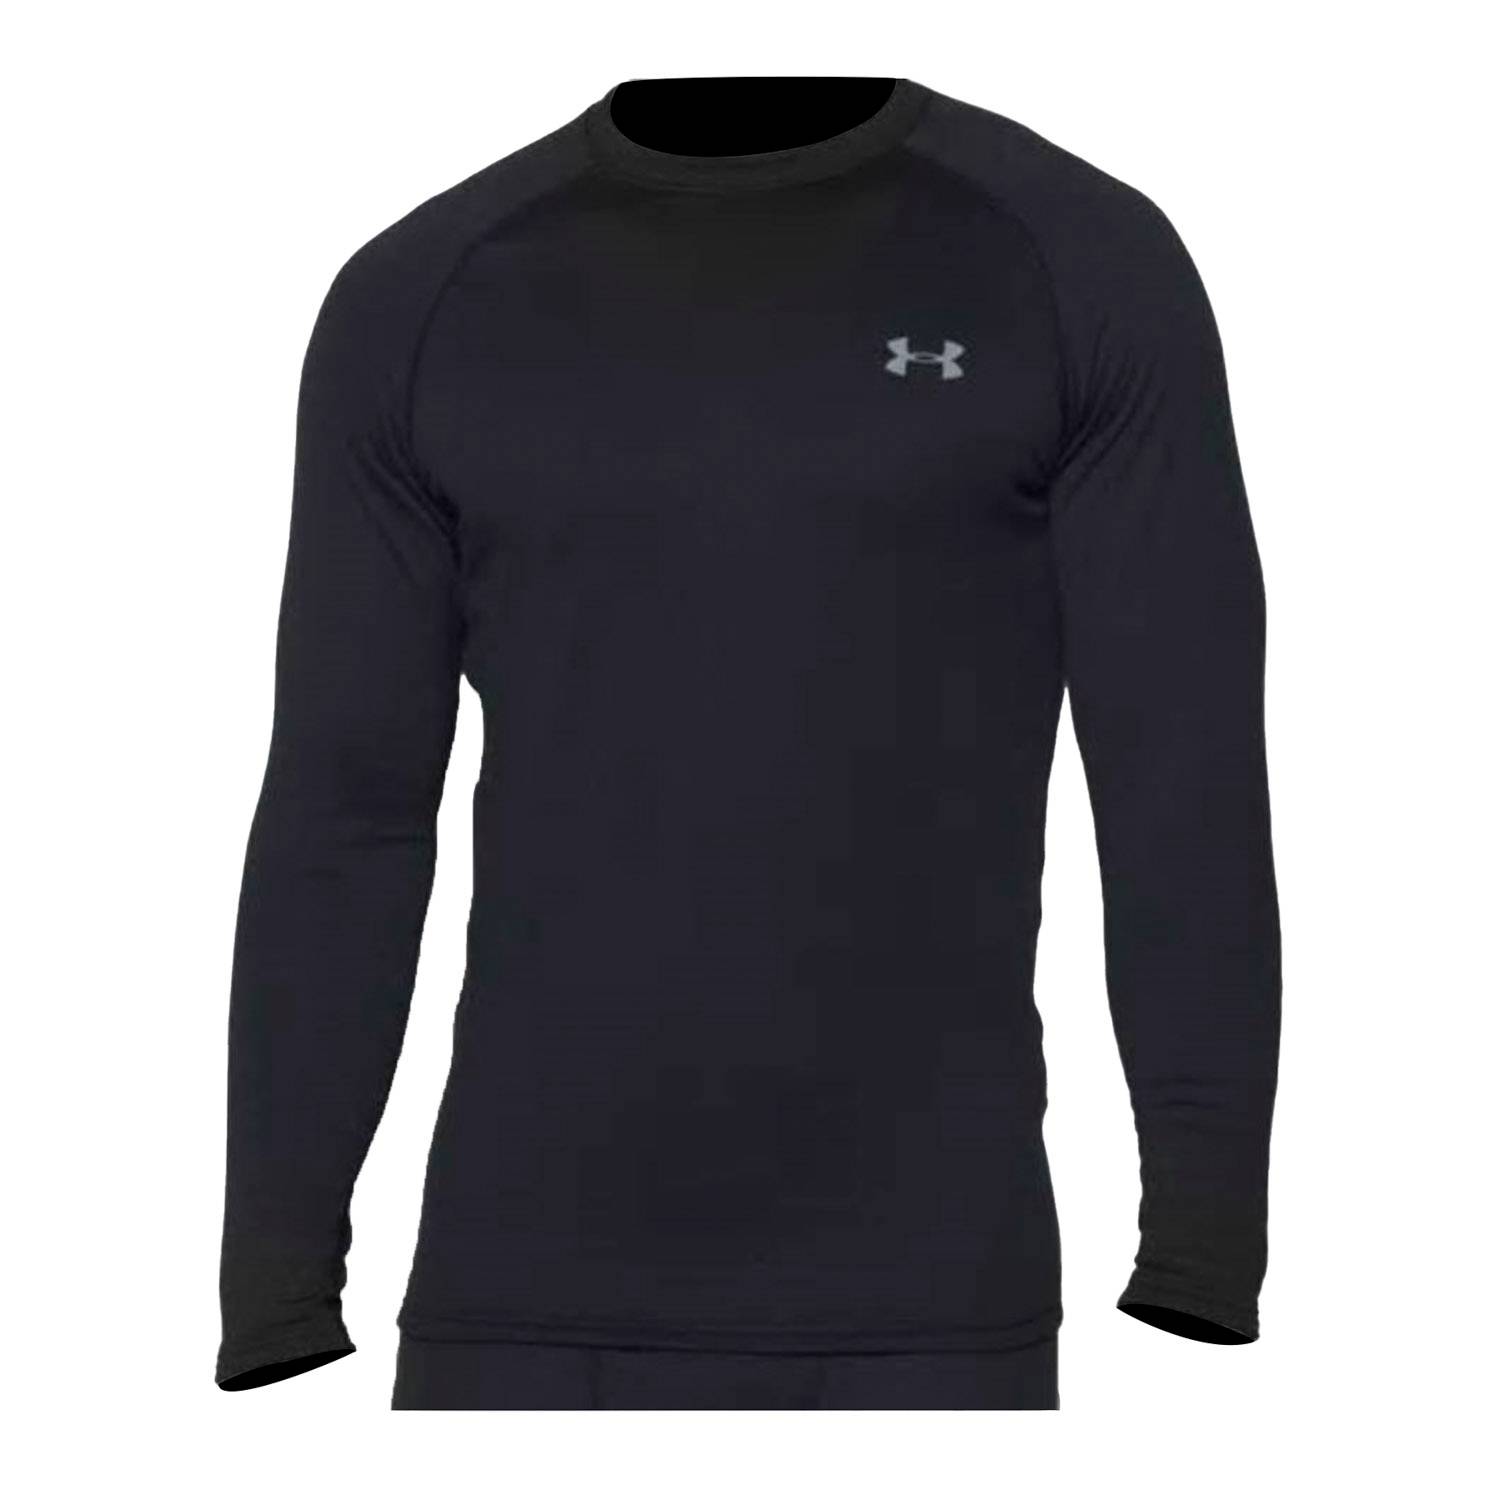 where to purchase under armour clothing